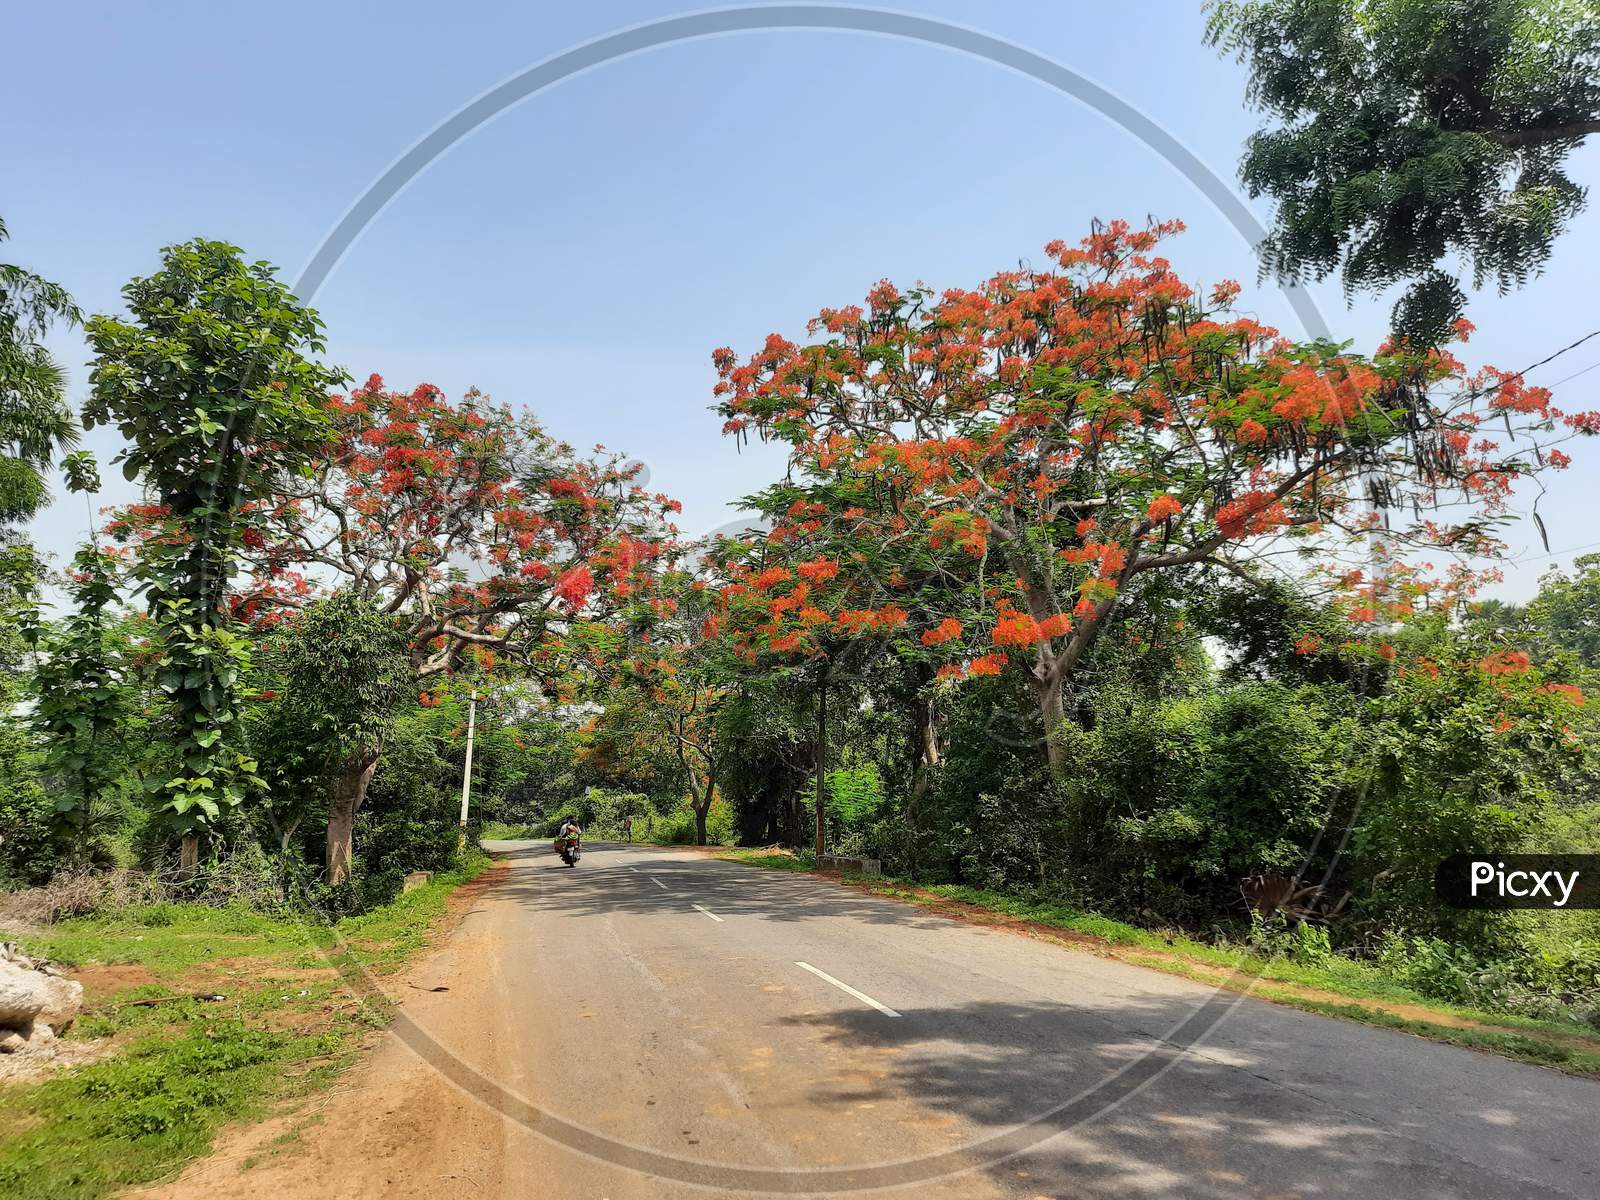 Flowers with trees on road side